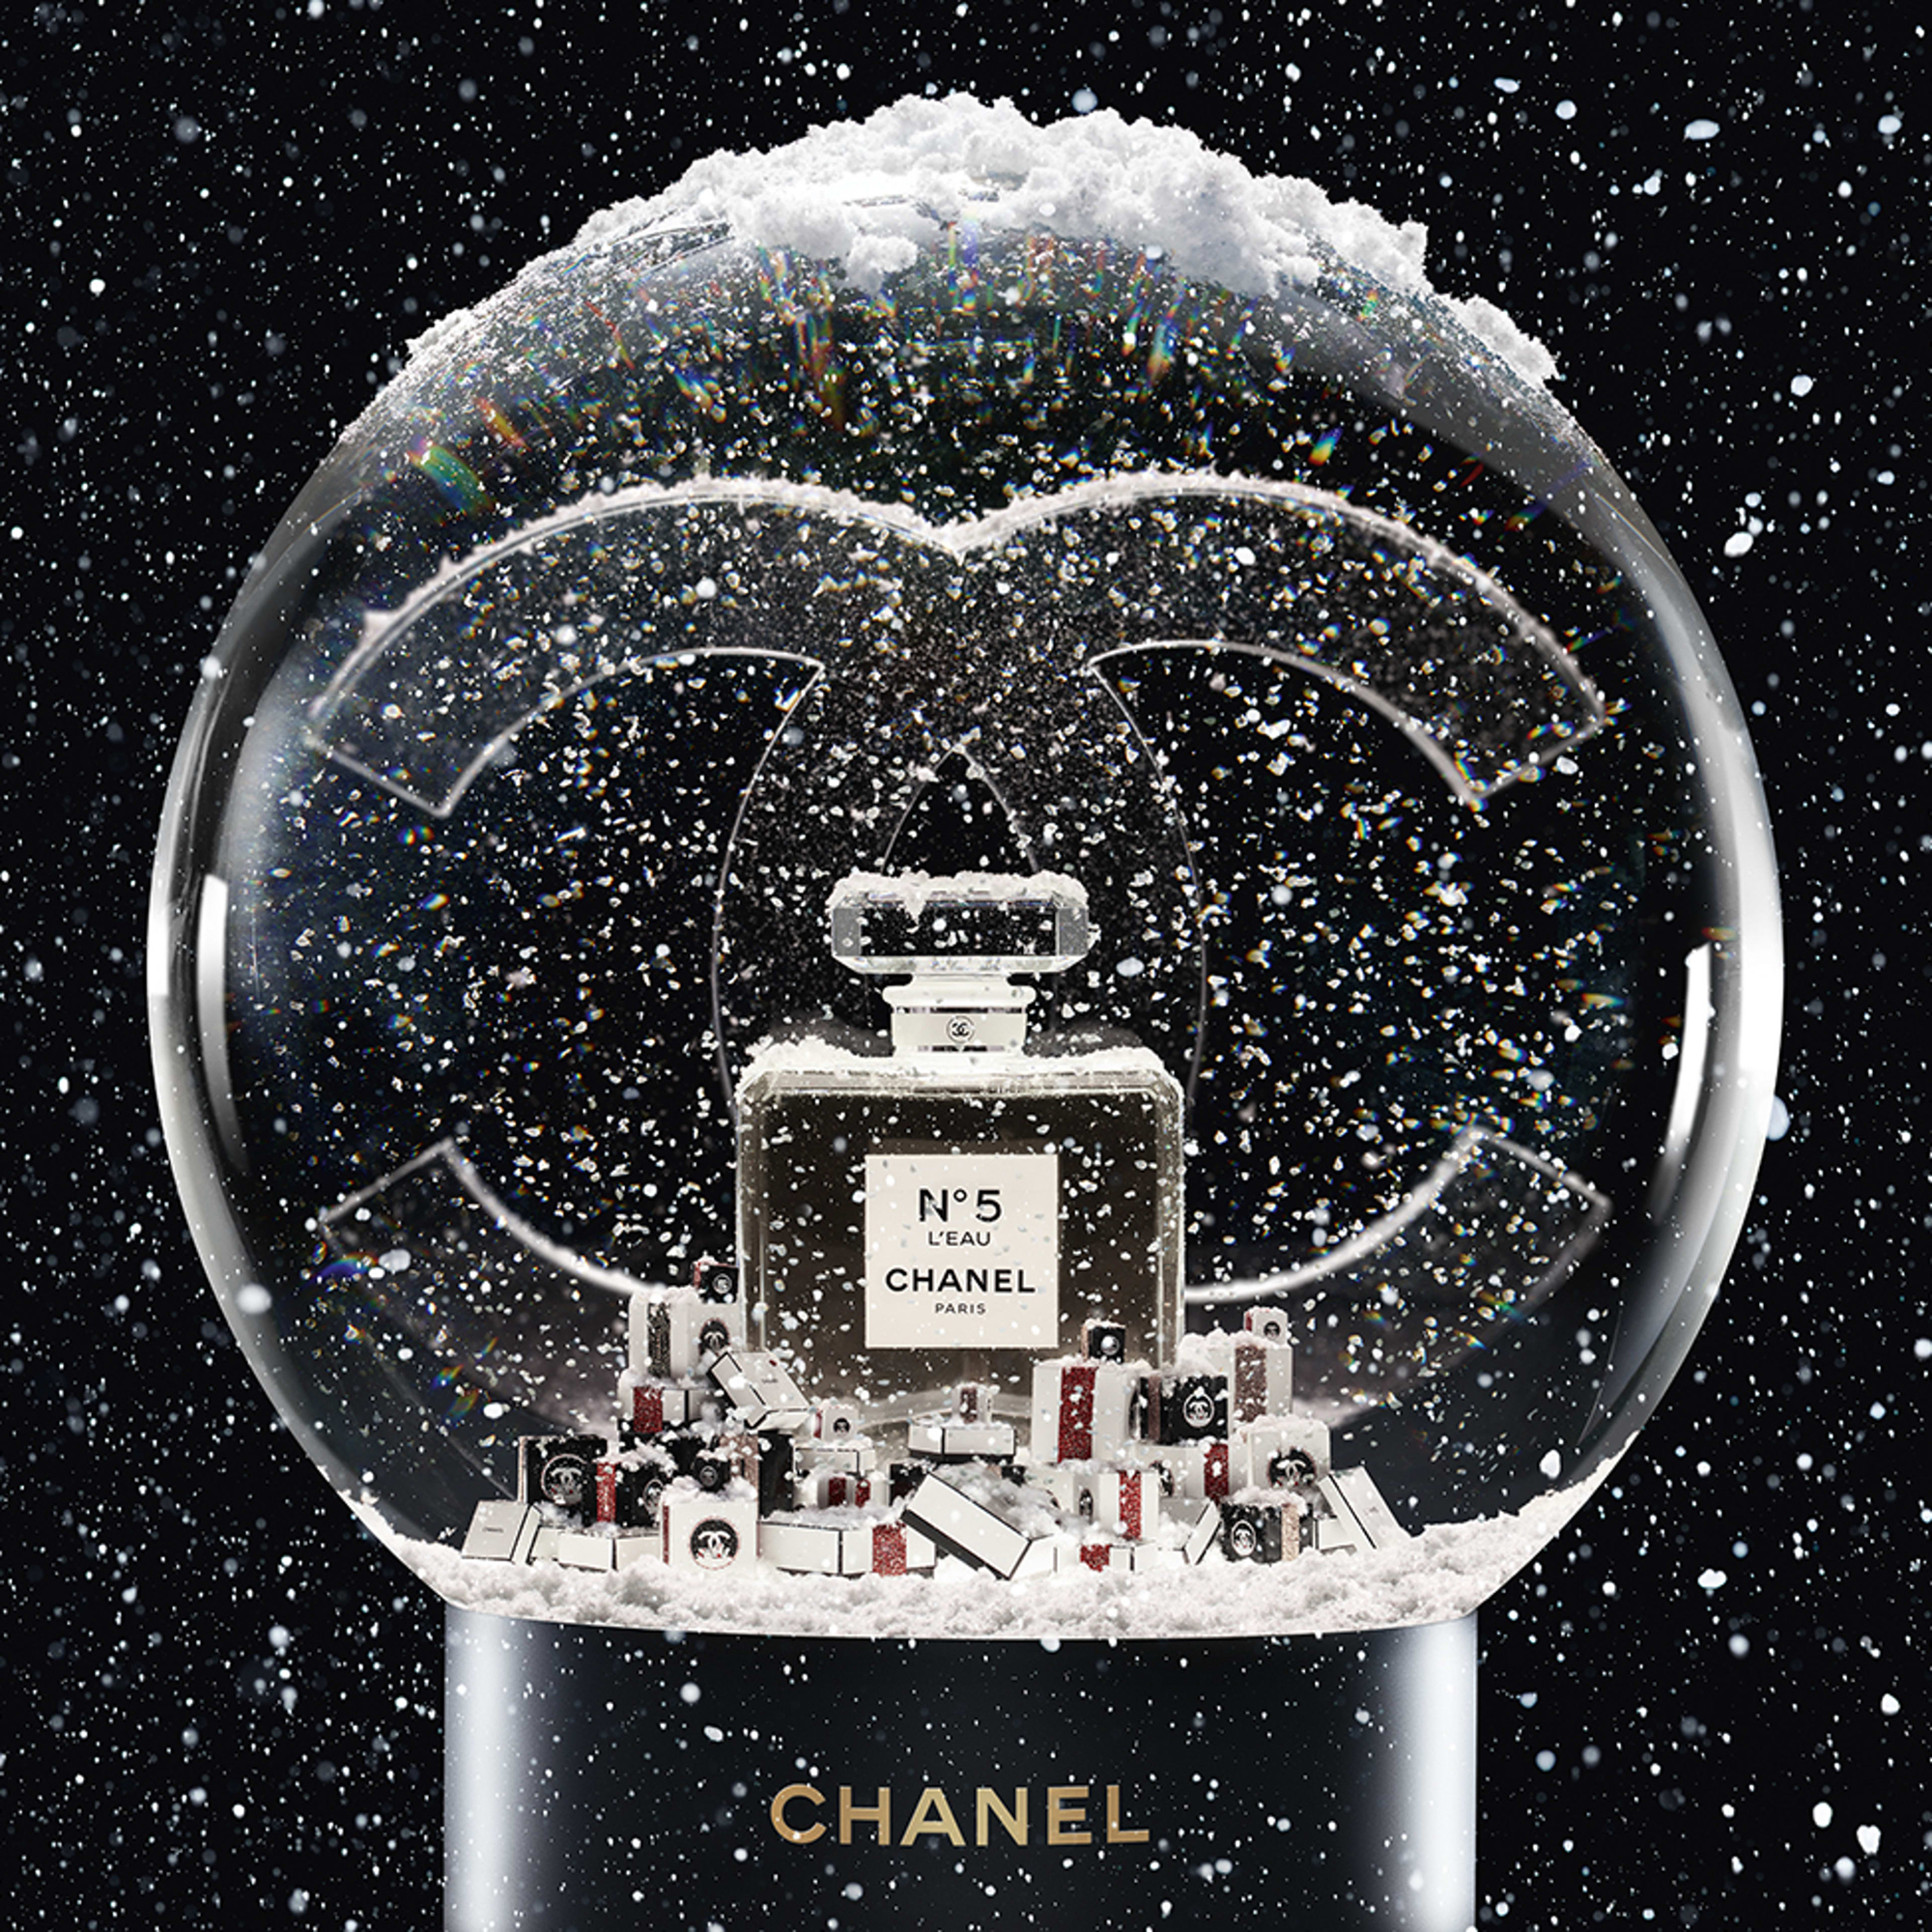 CHANEL-ling 2020 with Nº 5 Léau – JaneSNA